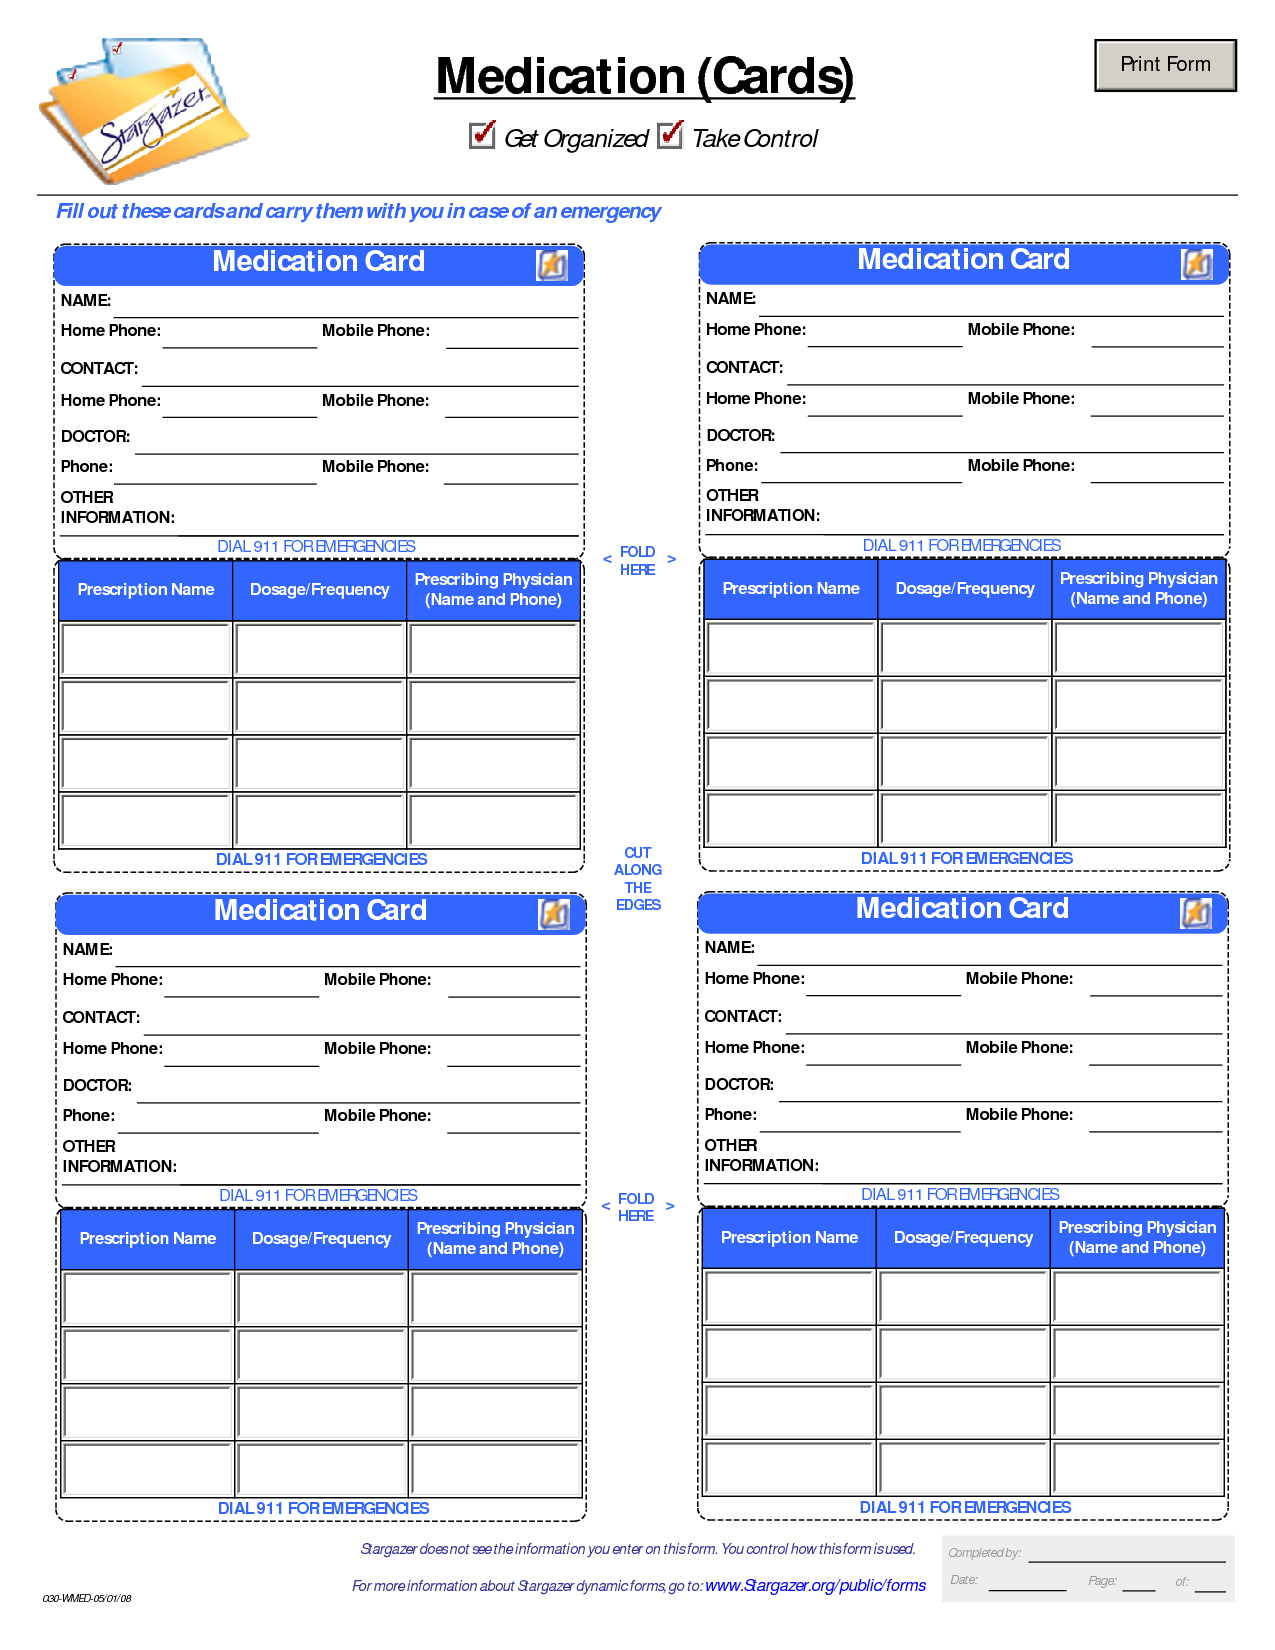 Free Medication Administration Record Template Excel Yahoo Image Free Printable Wallet